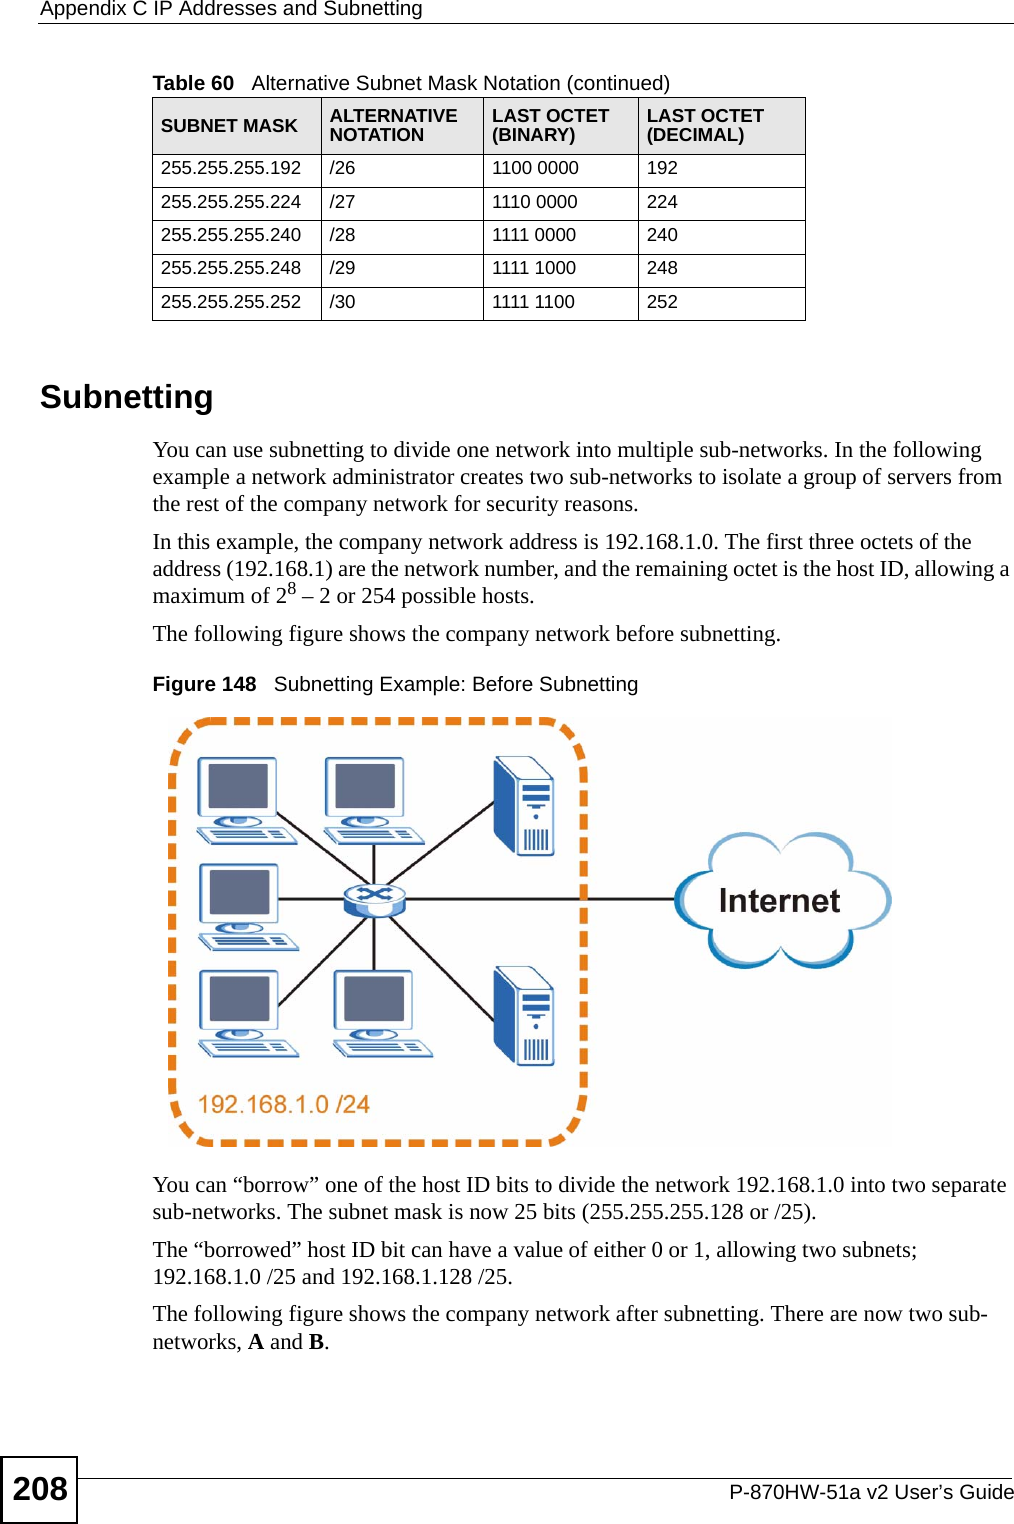 Appendix C IP Addresses and SubnettingP-870HW-51a v2 User’s Guide208SubnettingYou can use subnetting to divide one network into multiple sub-networks. In the following example a network administrator creates two sub-networks to isolate a group of servers from the rest of the company network for security reasons.In this example, the company network address is 192.168.1.0. The first three octets of the address (192.168.1) are the network number, and the remaining octet is the host ID, allowing a maximum of 28 – 2 or 254 possible hosts.The following figure shows the company network before subnetting.  Figure 148   Subnetting Example: Before SubnettingYou can “borrow” one of the host ID bits to divide the network 192.168.1.0 into two separate sub-networks. The subnet mask is now 25 bits (255.255.255.128 or /25).The “borrowed” host ID bit can have a value of either 0 or 1, allowing two subnets; 192.168.1.0 /25 and 192.168.1.128 /25. The following figure shows the company network after subnetting. There are now two sub-networks, A and B. 255.255.255.192 /26 1100 0000 192255.255.255.224 /27 1110 0000 224255.255.255.240 /28 1111 0000 240255.255.255.248 /29 1111 1000 248255.255.255.252 /30 1111 1100 252Table 60   Alternative Subnet Mask Notation (continued)SUBNET MASK ALTERNATIVE NOTATION LAST OCTET (BINARY) LAST OCTET (DECIMAL)